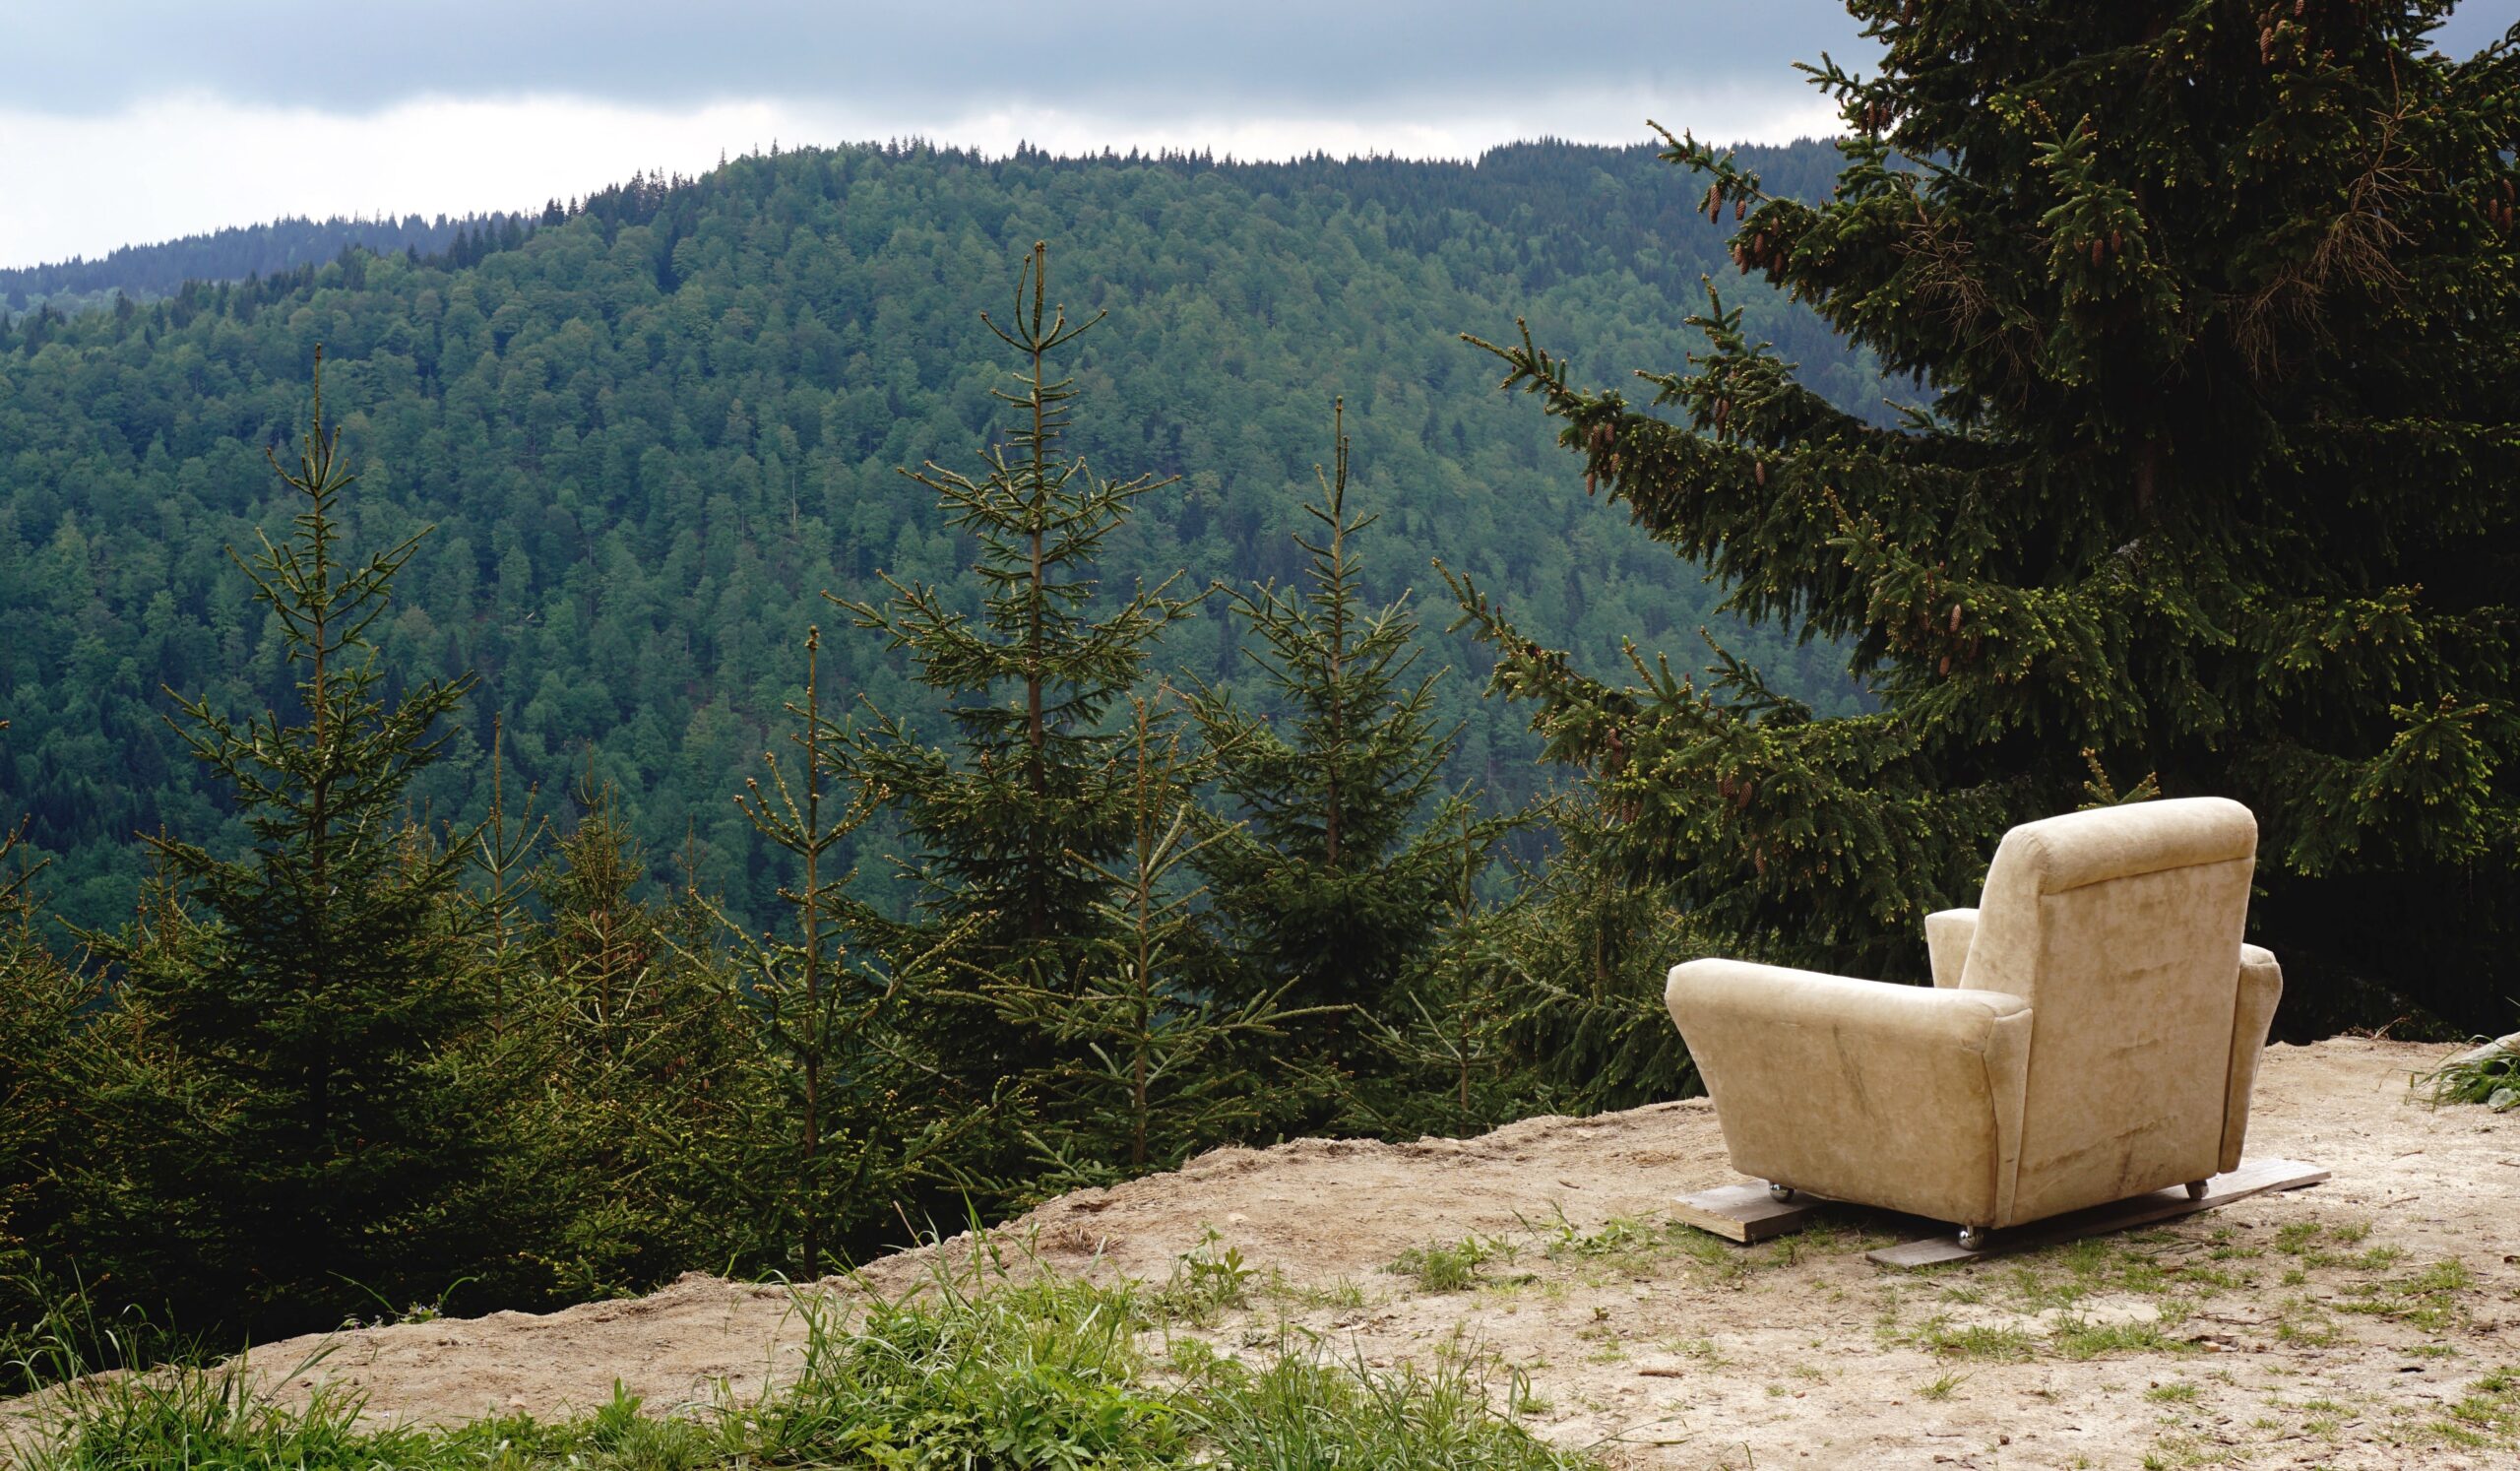 If a tree falls in the forest, an no one occupies the plush armchair overlooking the mountain, does the metaphor maintain its instructive value?